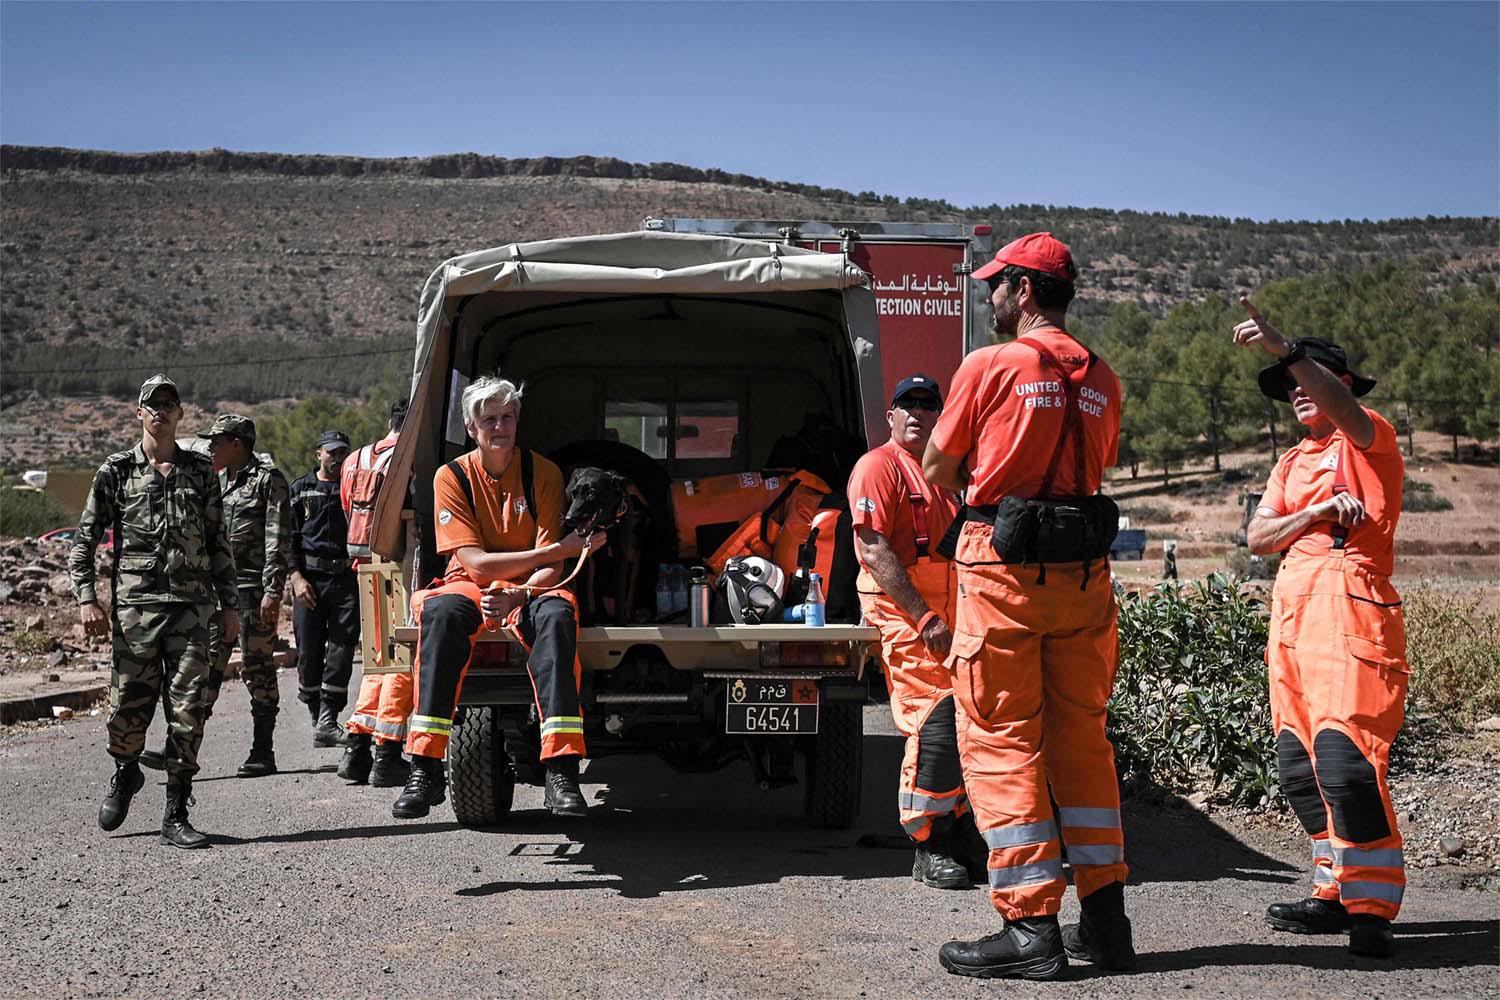 British rescue teams deployed at a Moroccan military field hospital in the village of Asni near Moulay Brahim 